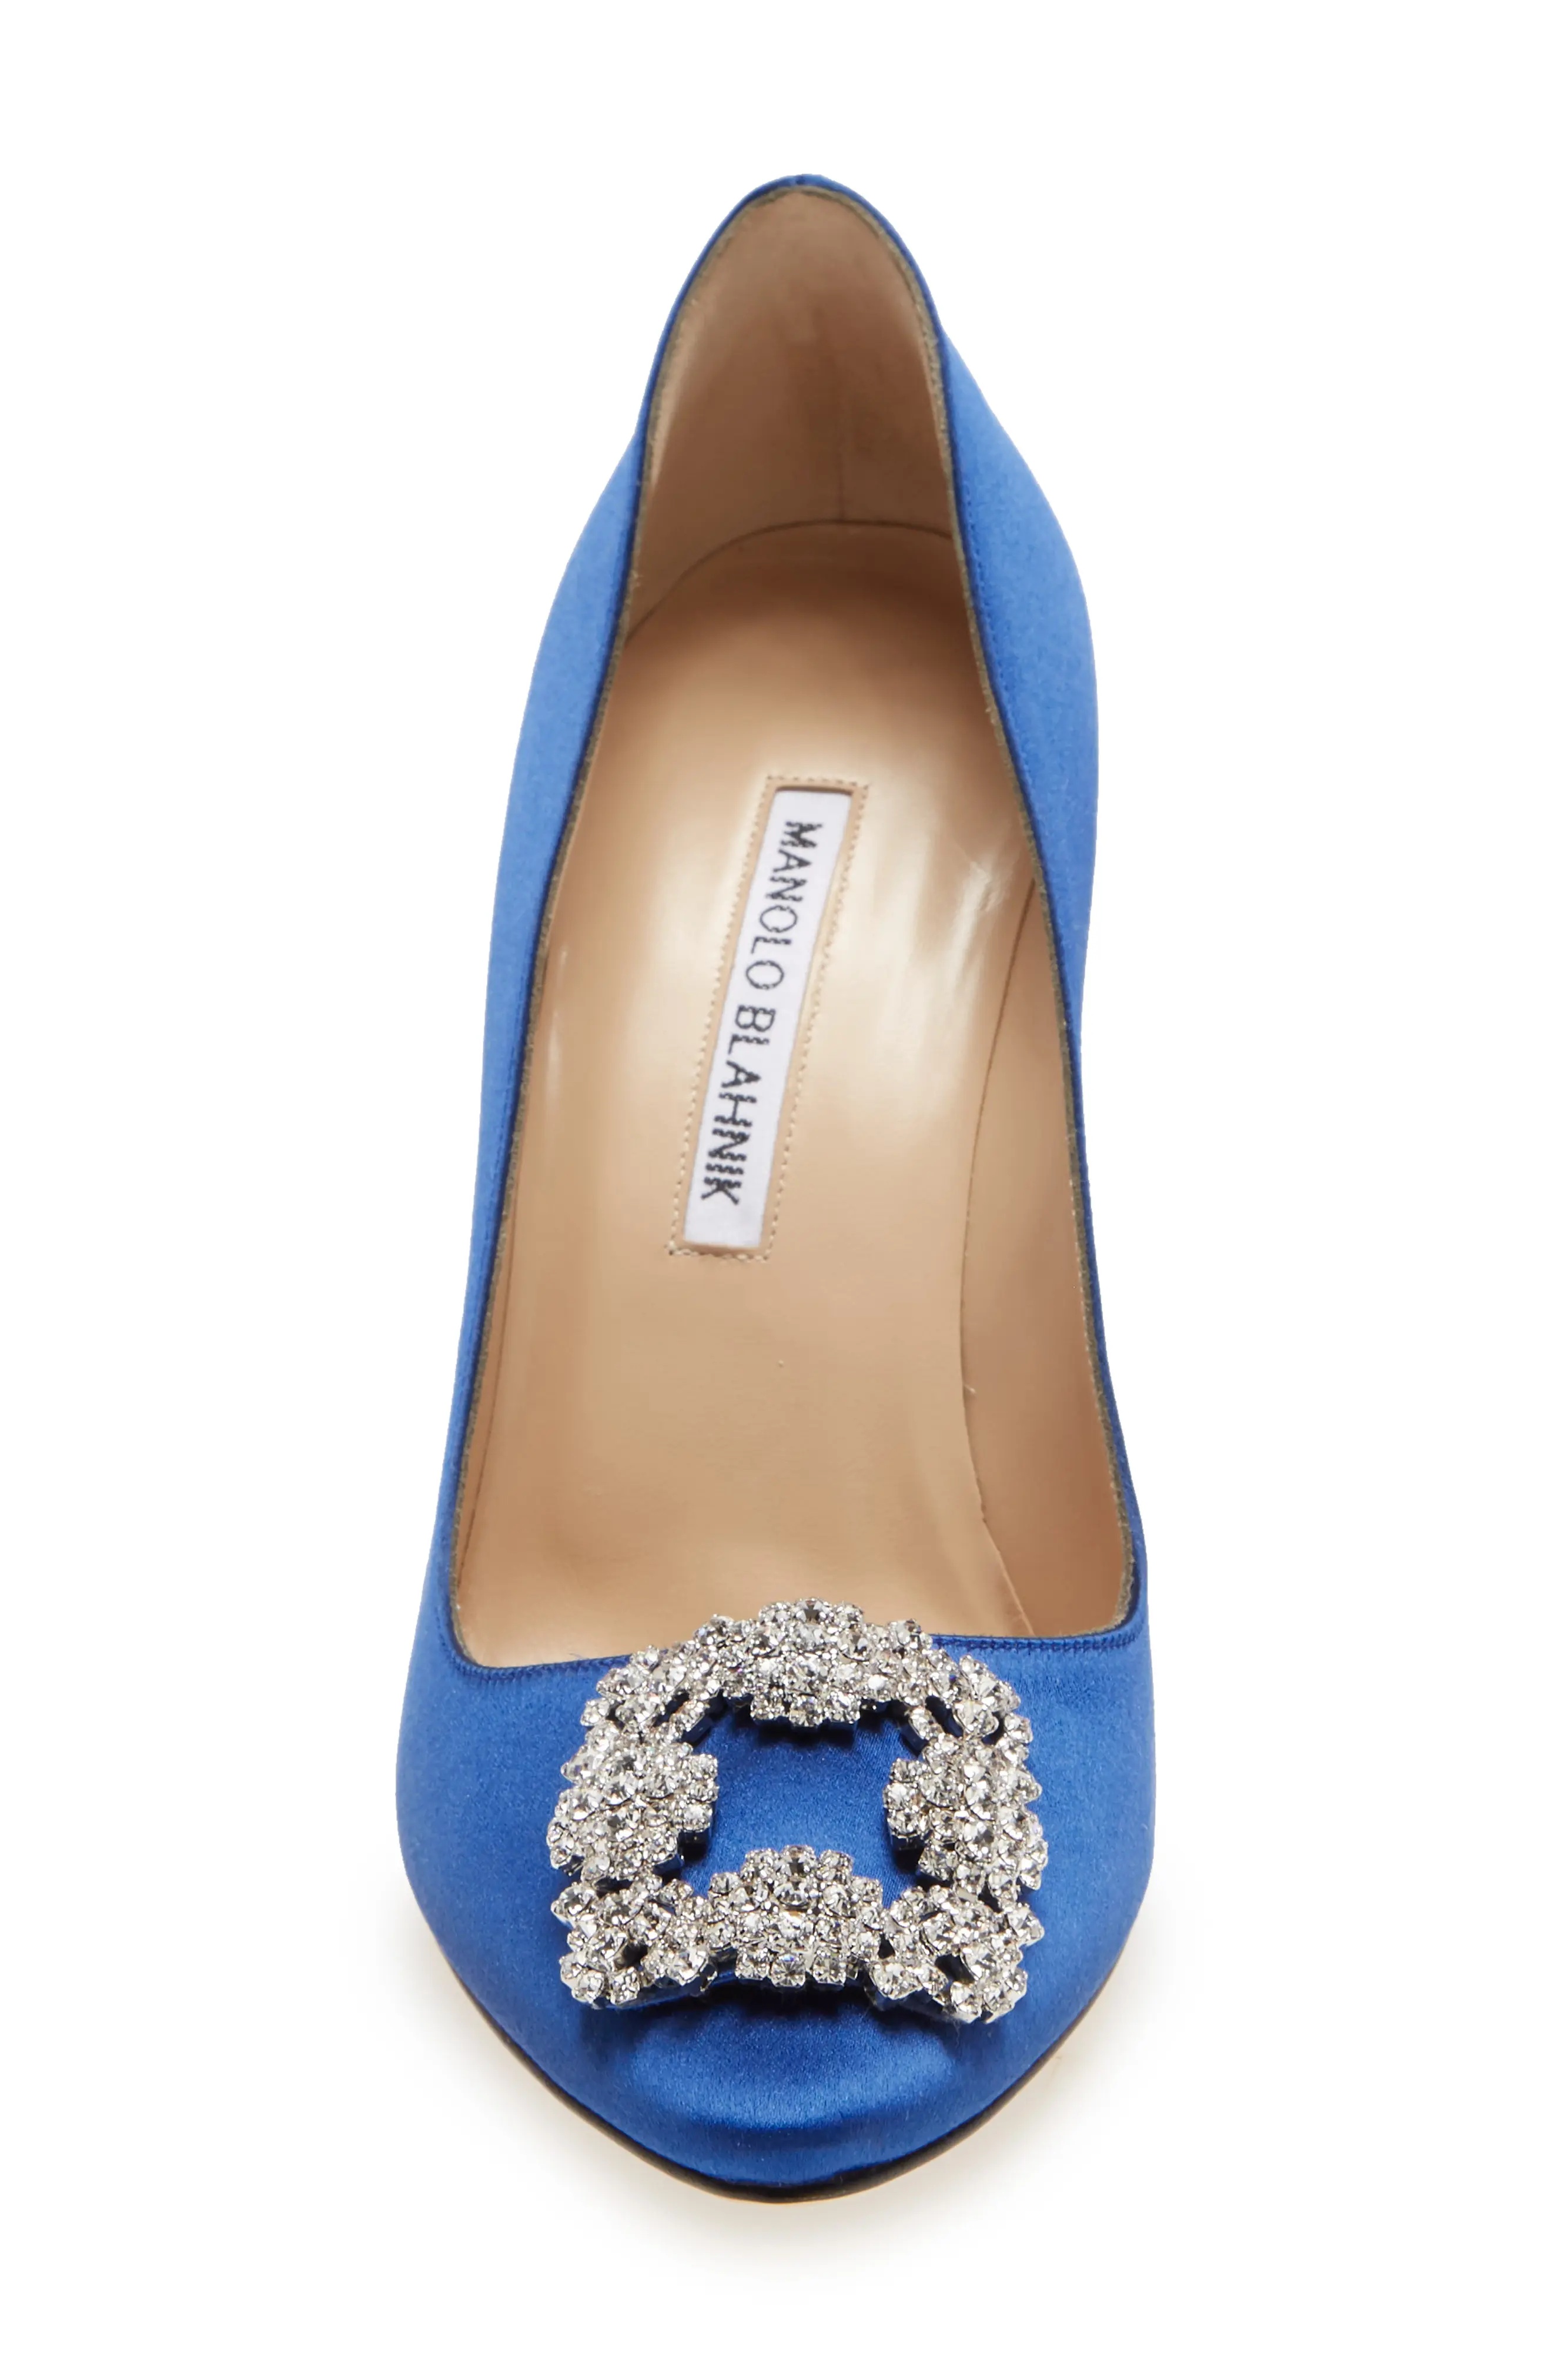 Hangisi Pointed Toe Pump in Blue Satin/Clear - 4